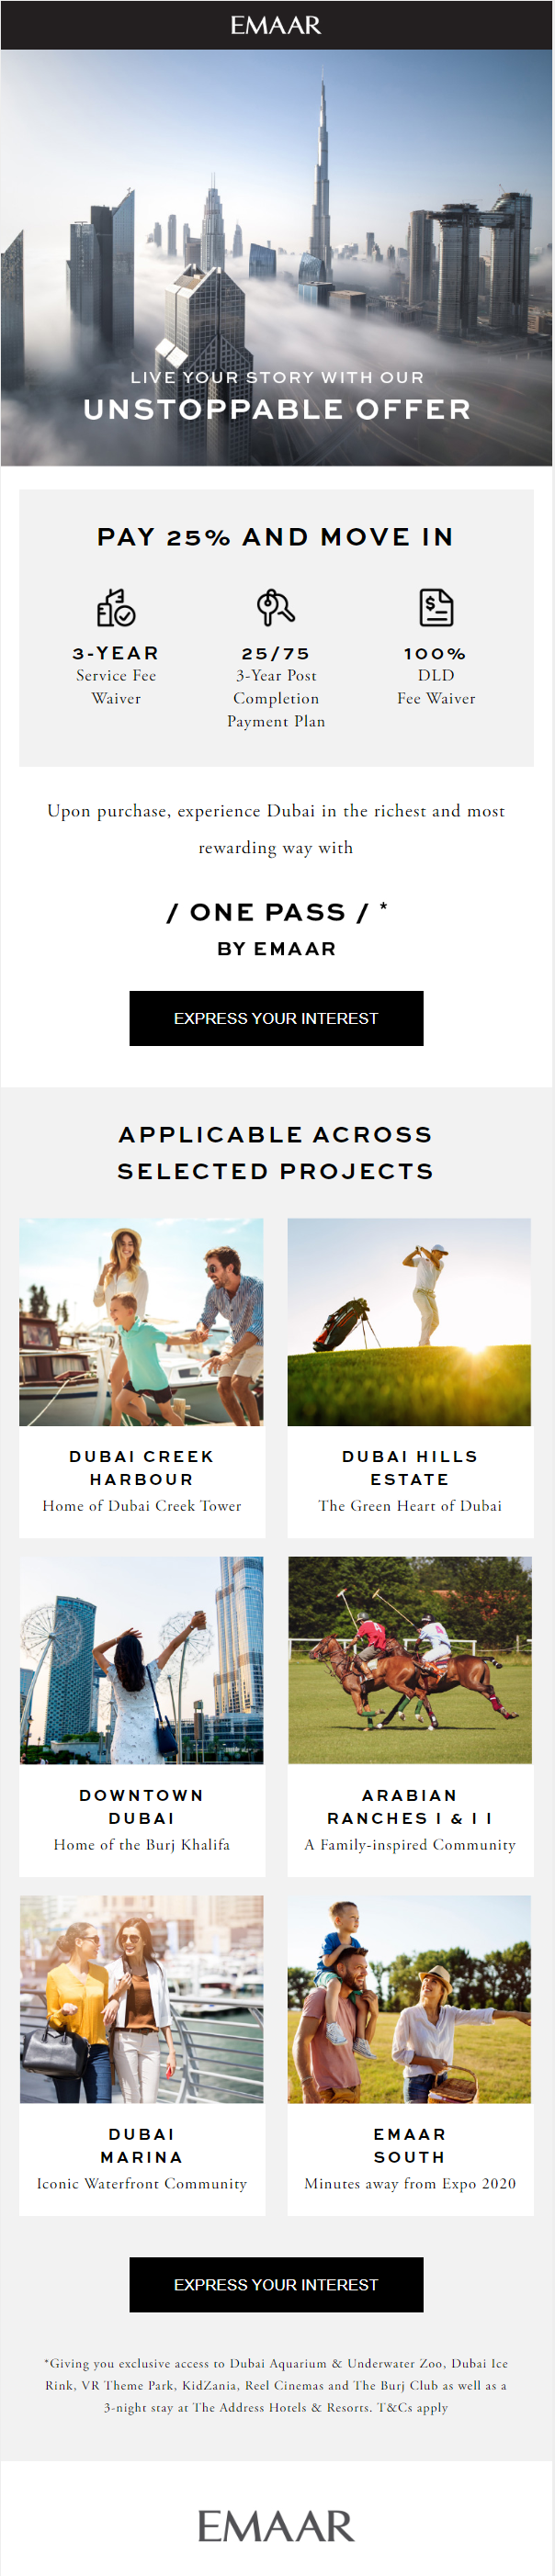 Pay 25% and move in at Emaar Properties in Dubai